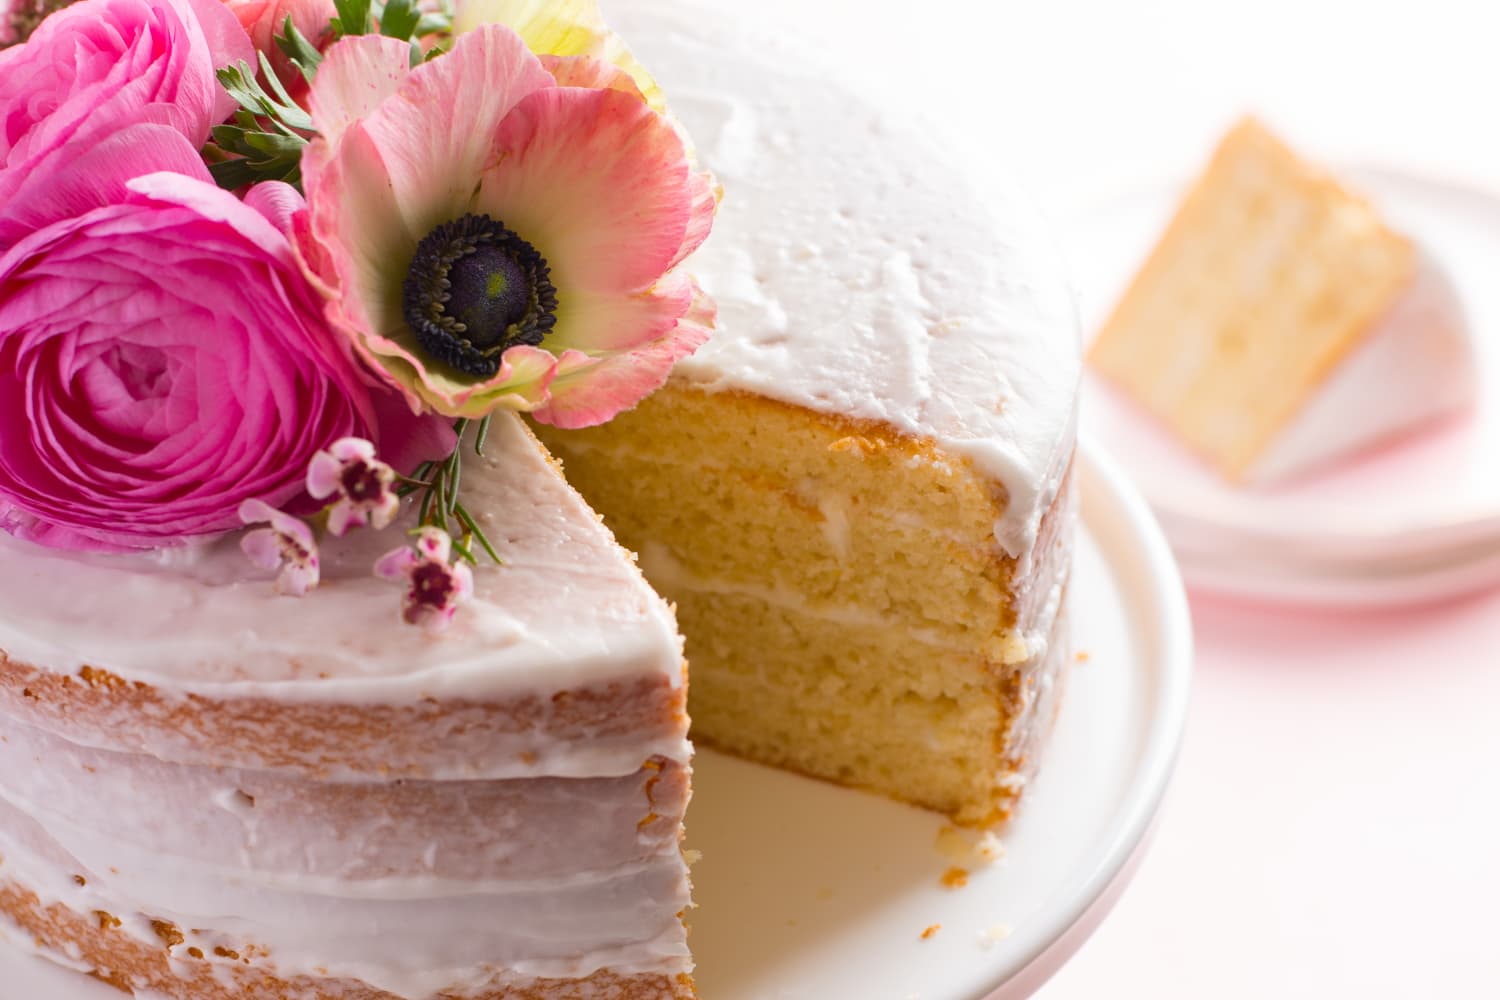 How To Put Fresh Flowers On Cake + Video